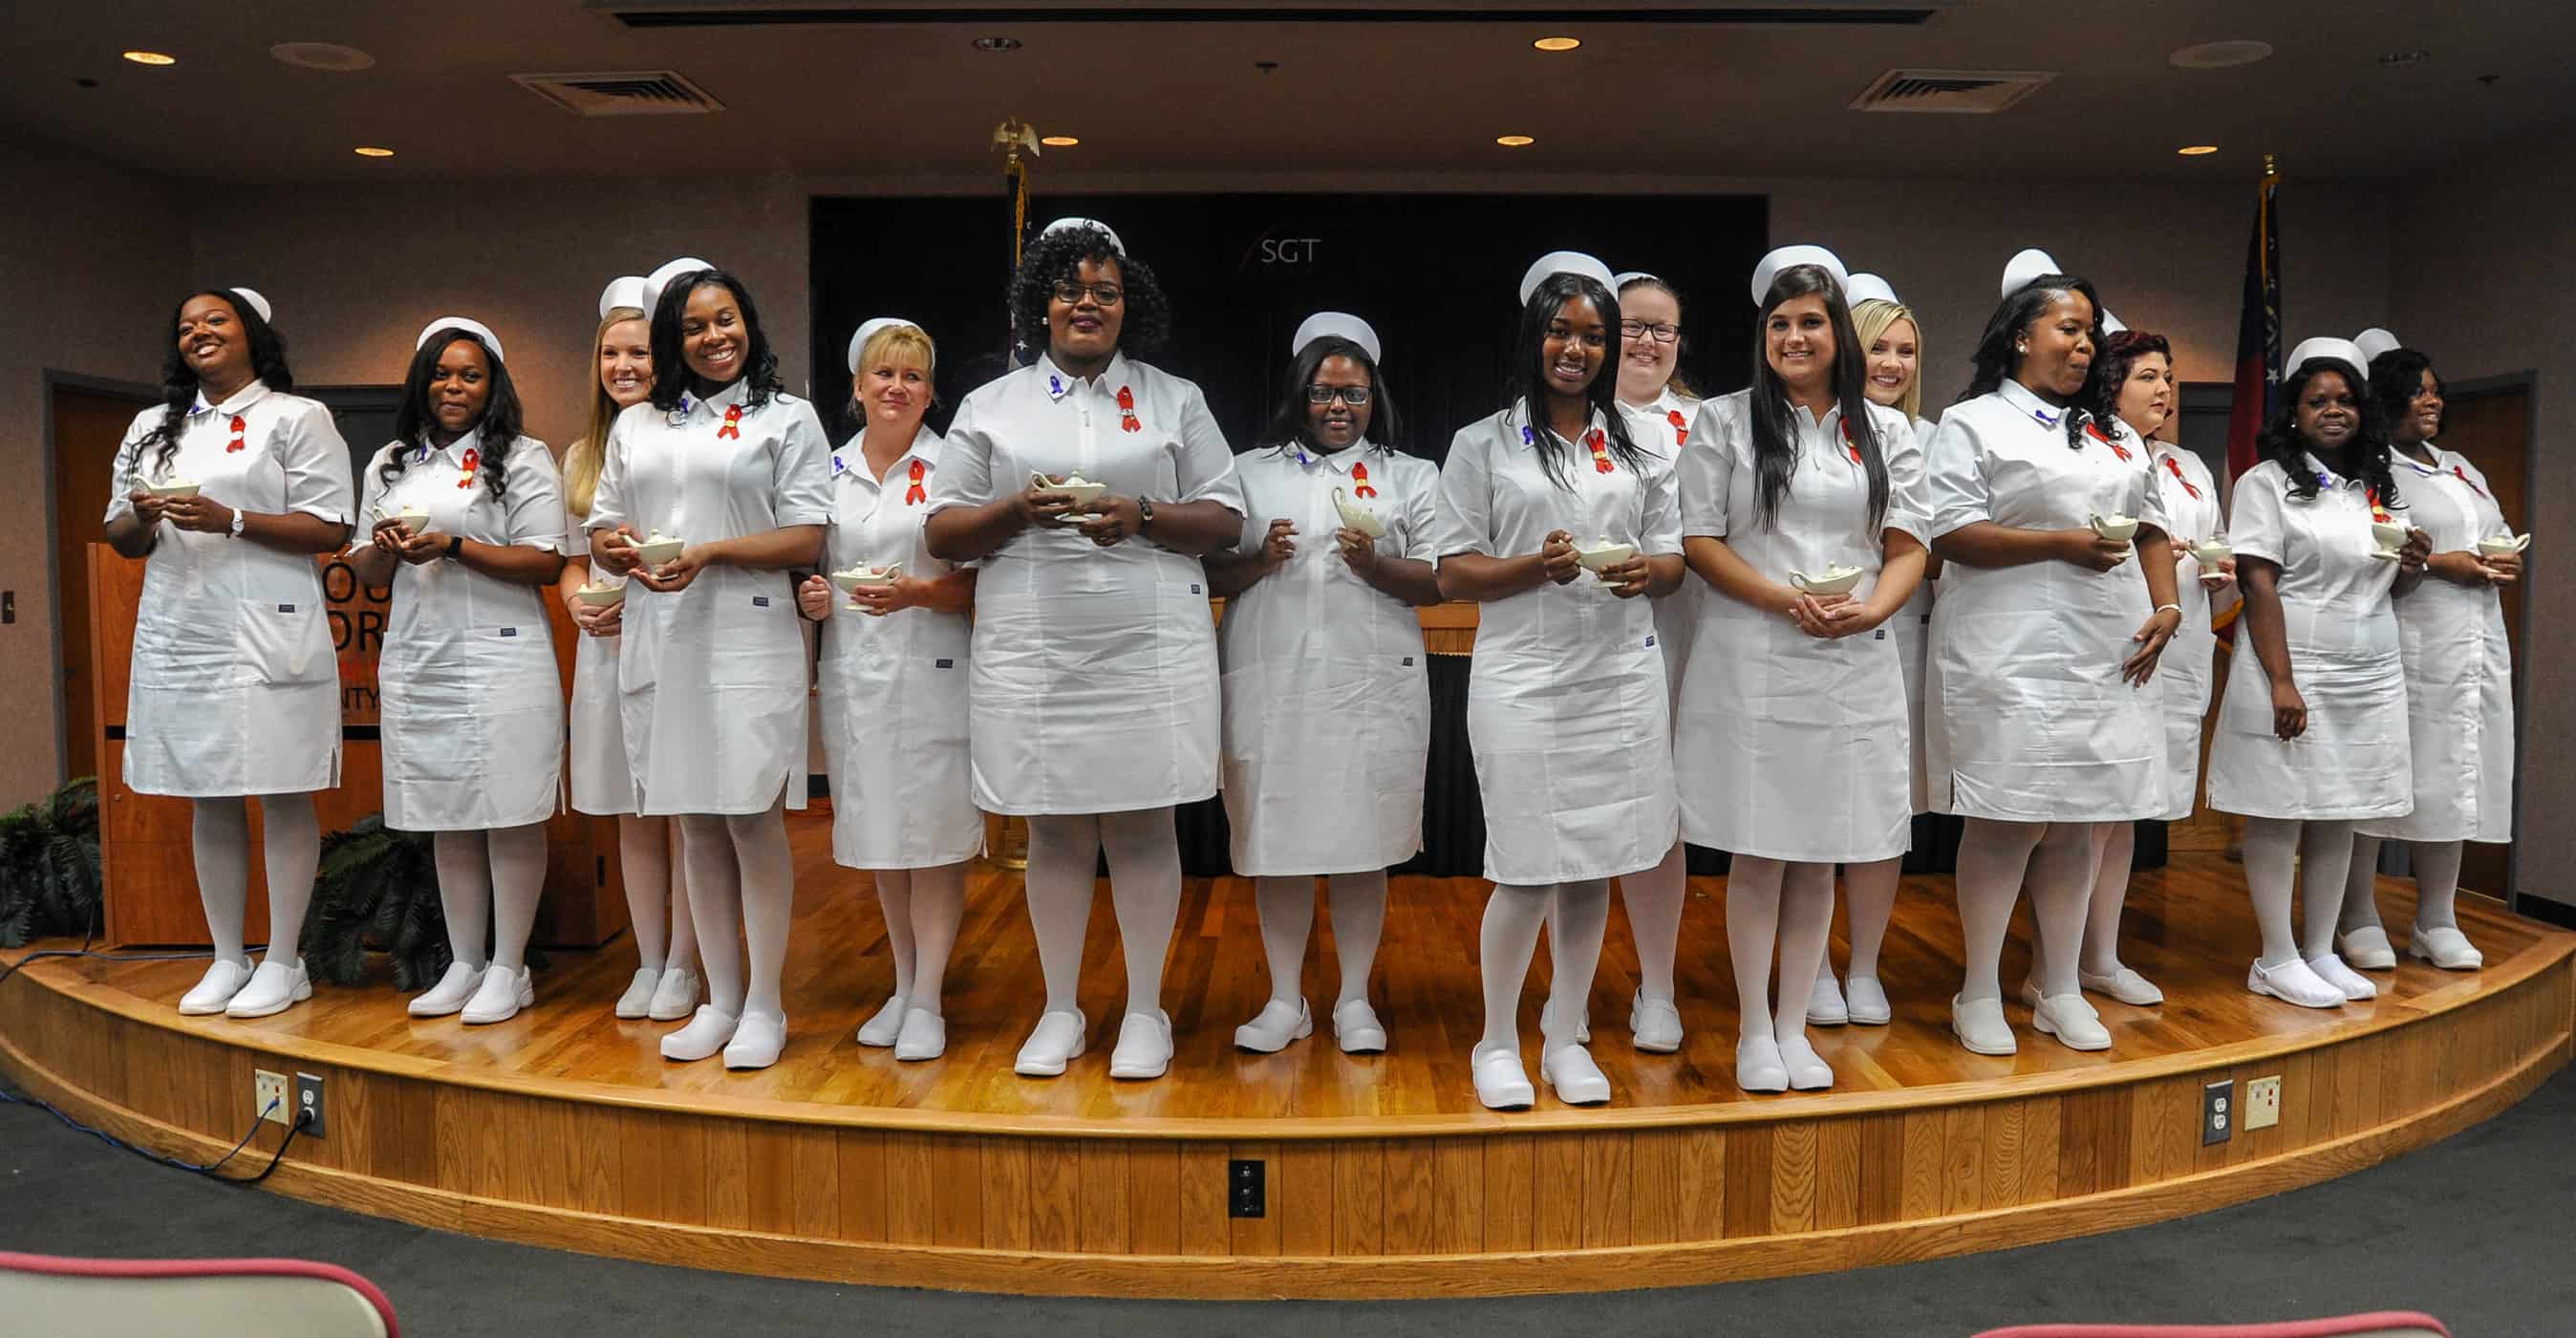 A group of 15 females in white nurse dresses stand side by side on a stage, holding candles.